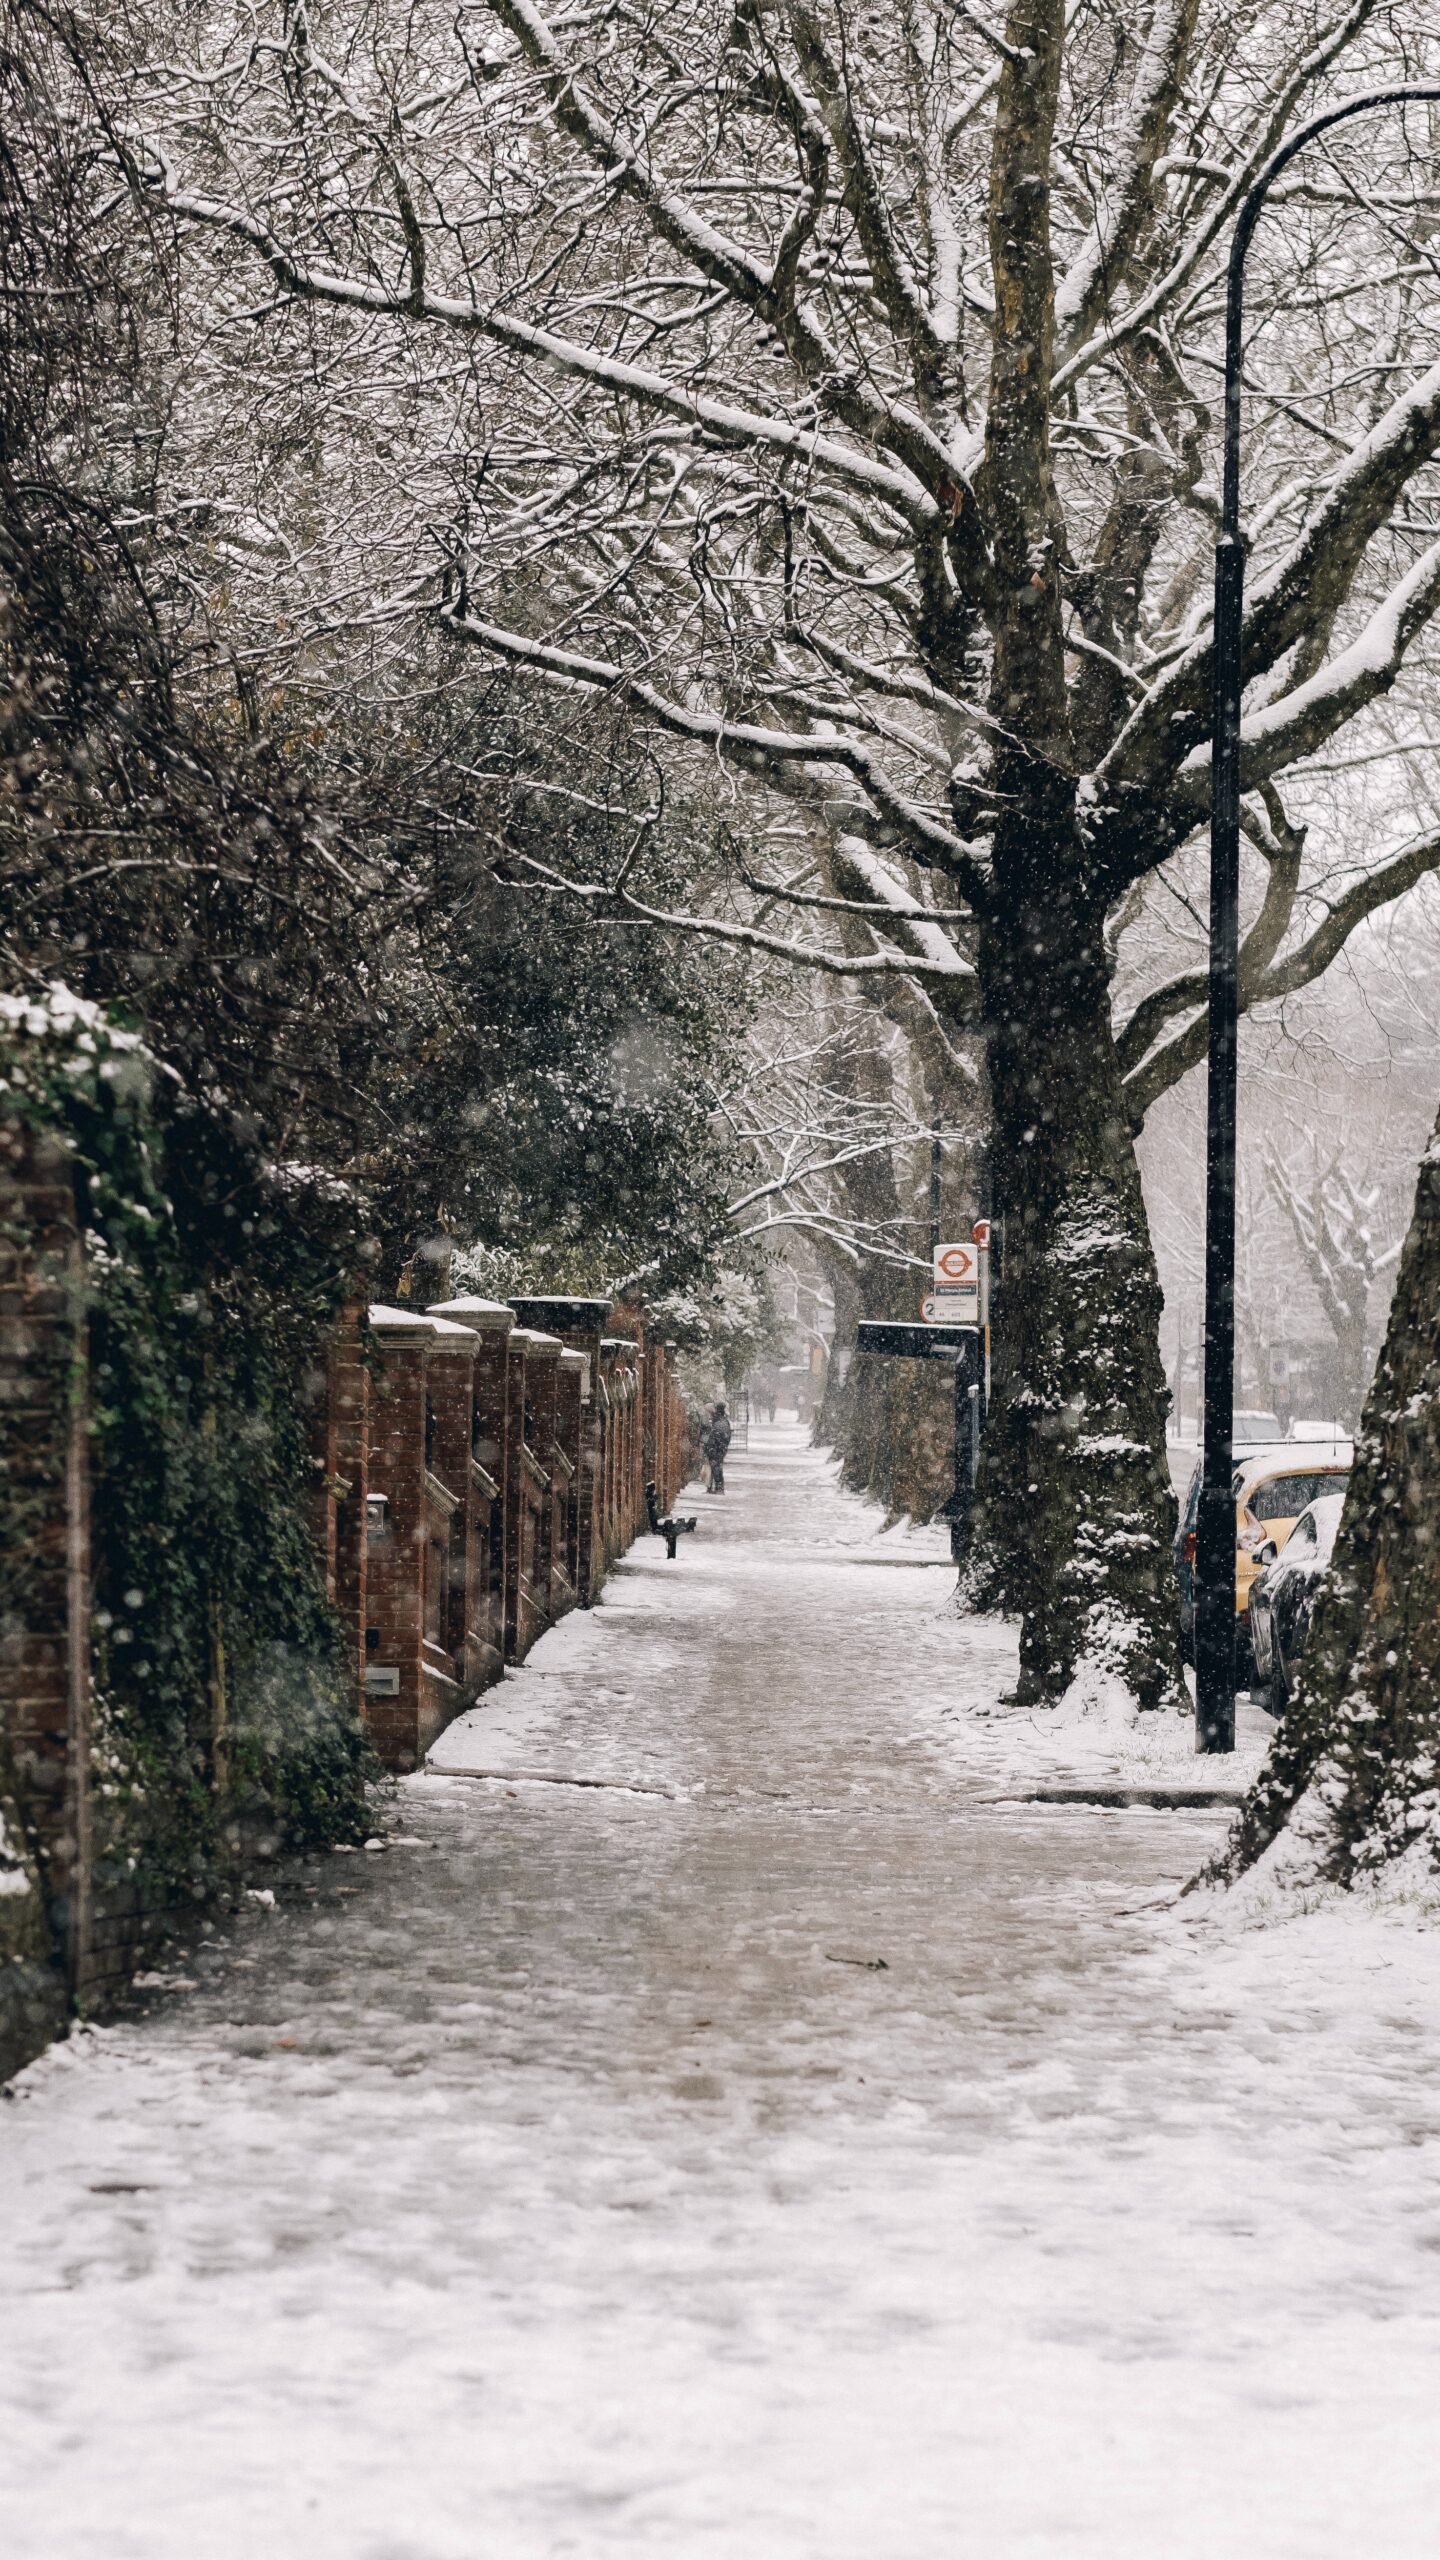 A wintry sidewalk can be beautiful, but also very dangerous if we let our minds wander